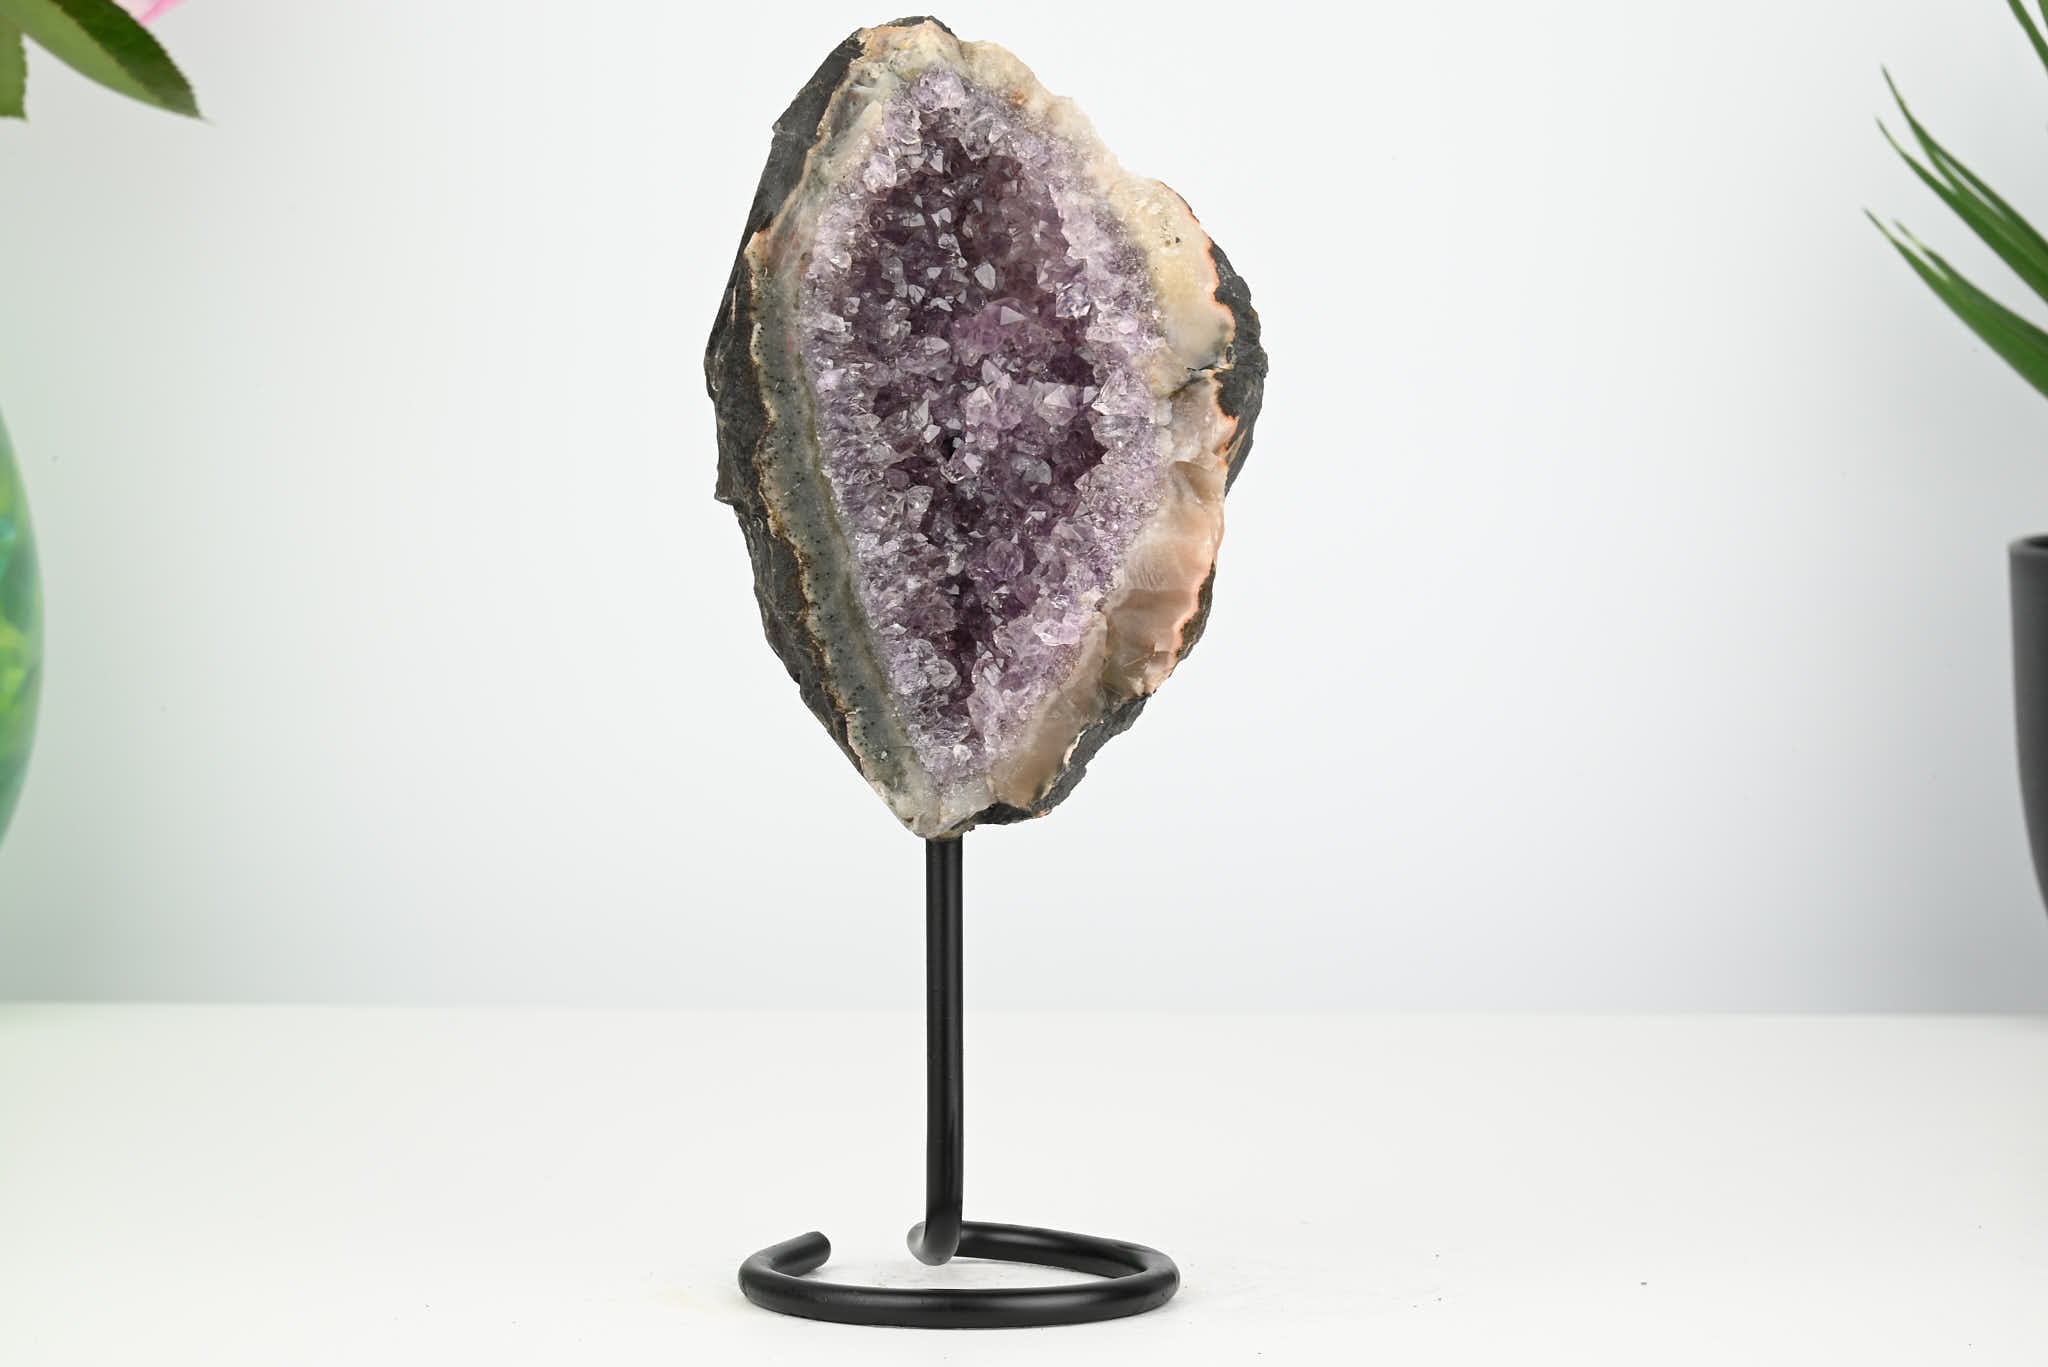 Amethyst Cluster on Stand - Small 18cm Tall - #CLUSAM-63035